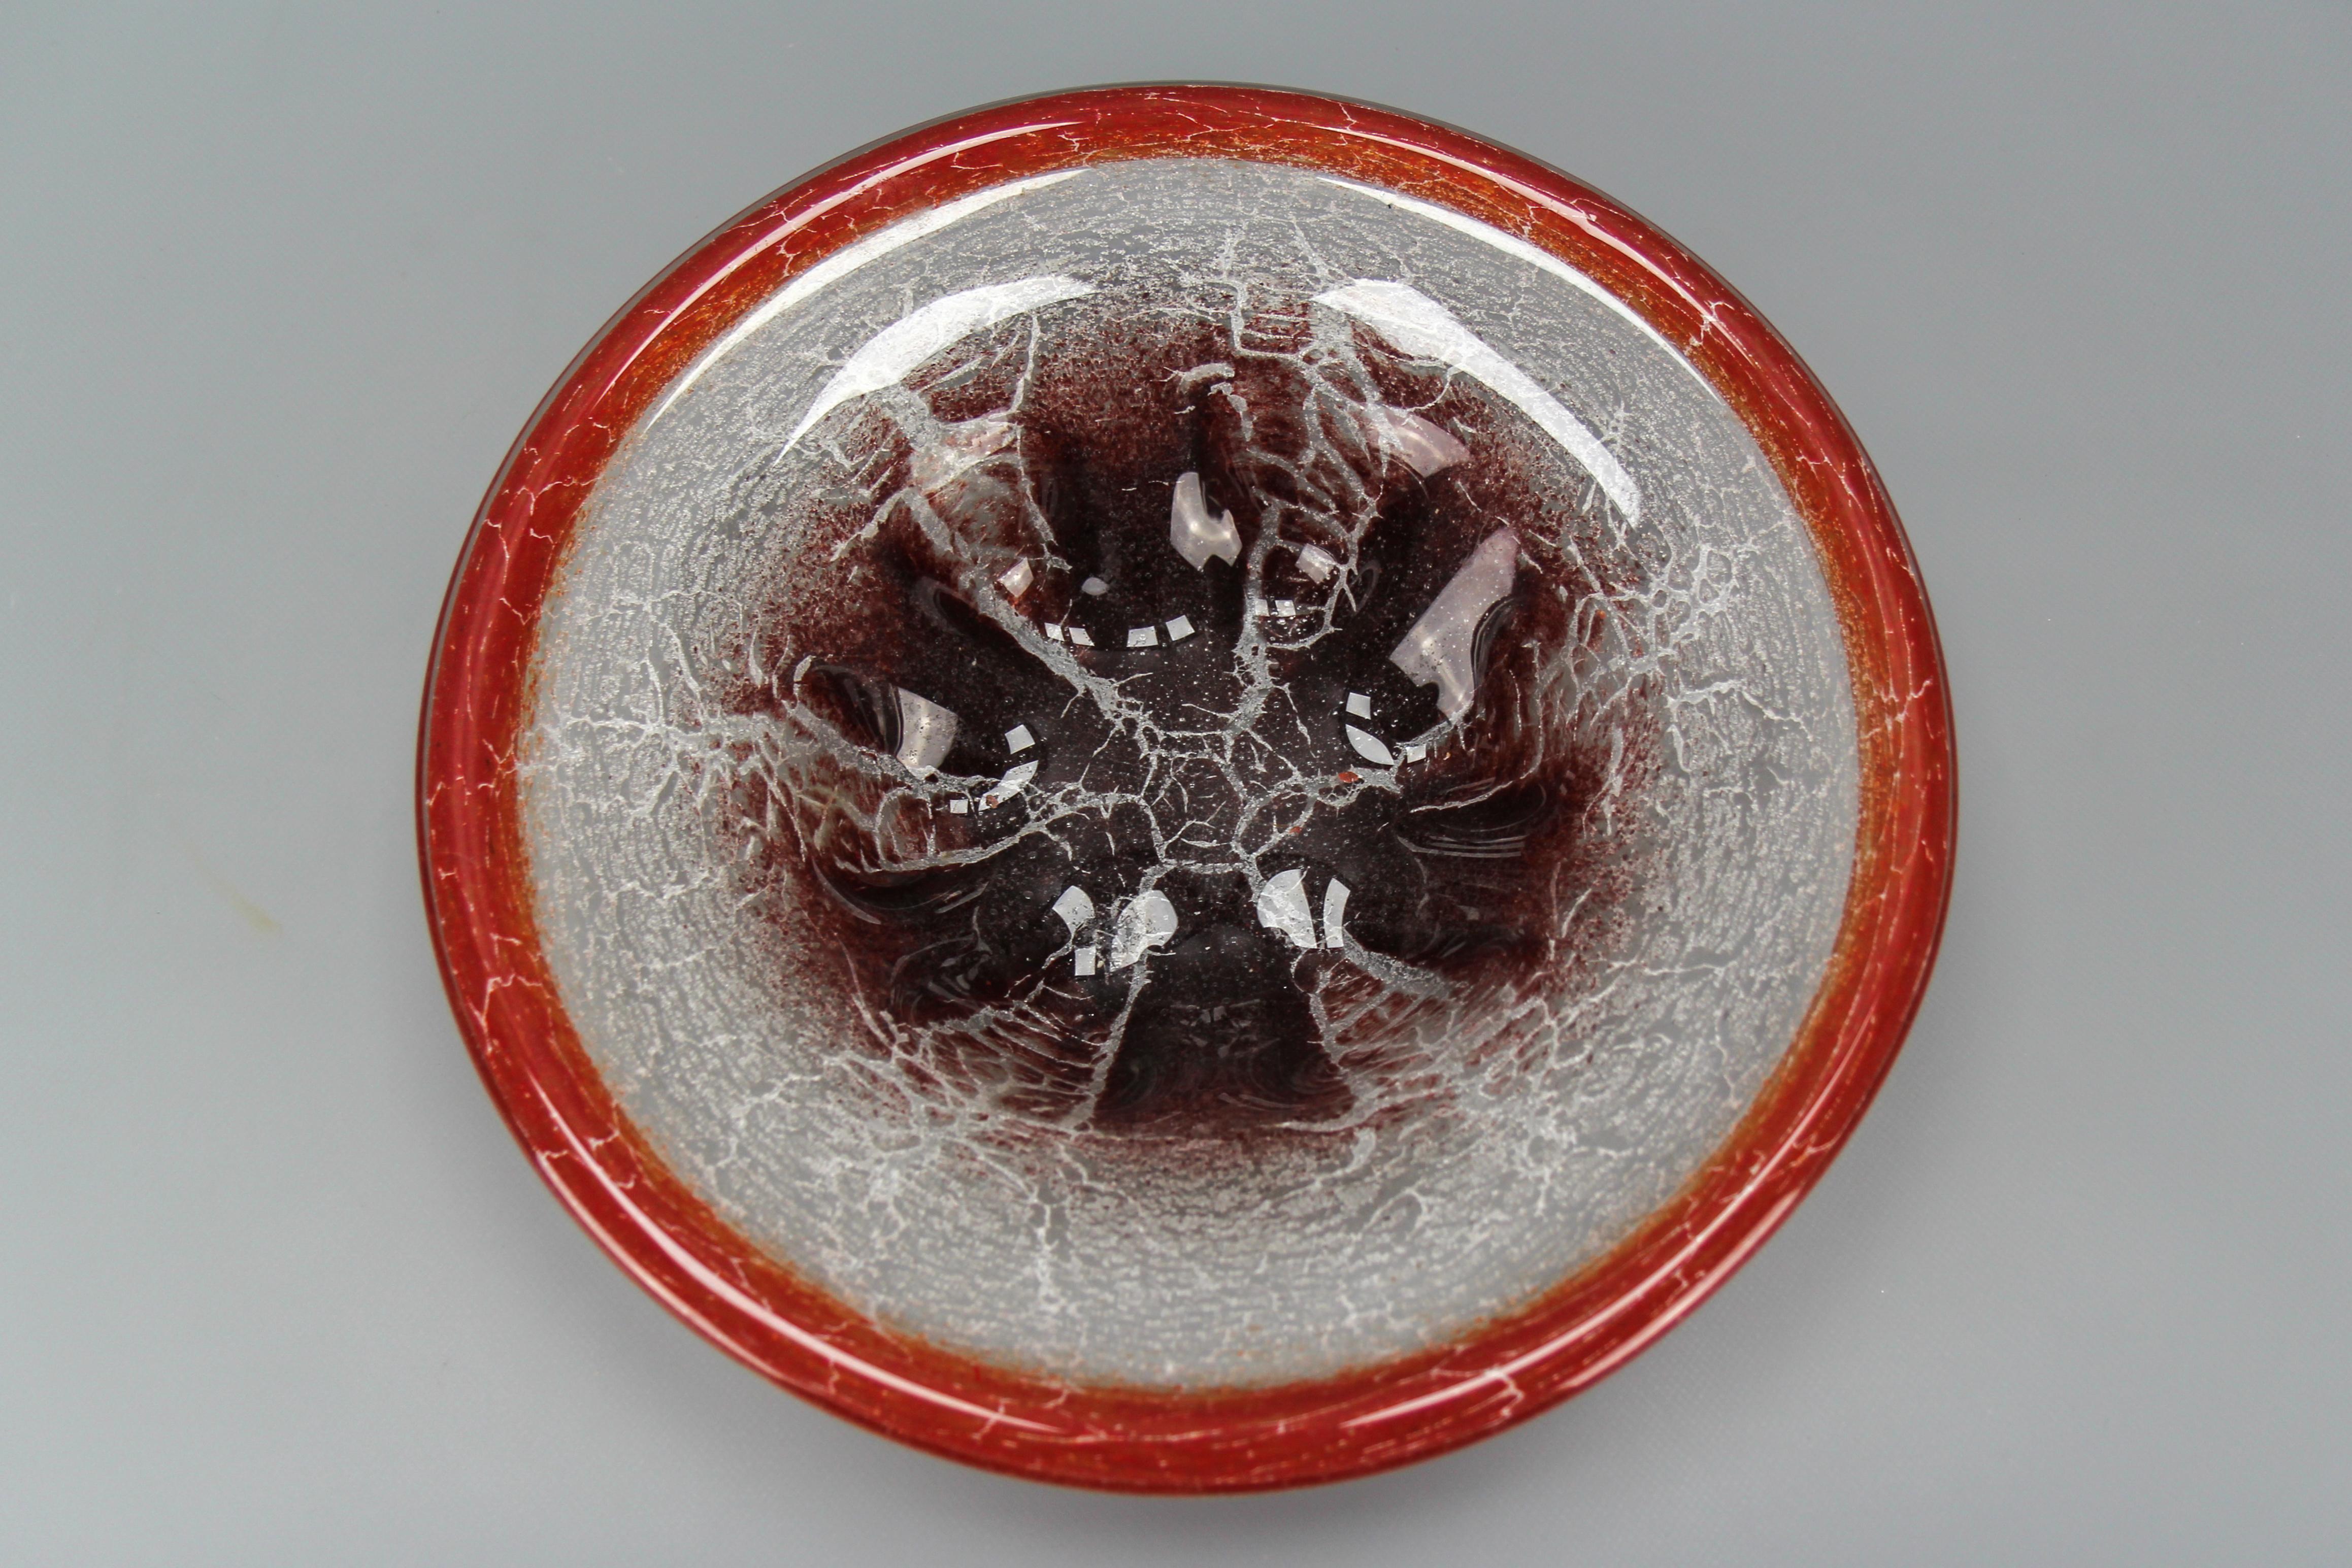 Mid-20th Century German Ikora Art Glass Bowl in Red, White and Burgundy by WMF, ca. 1930s For Sale